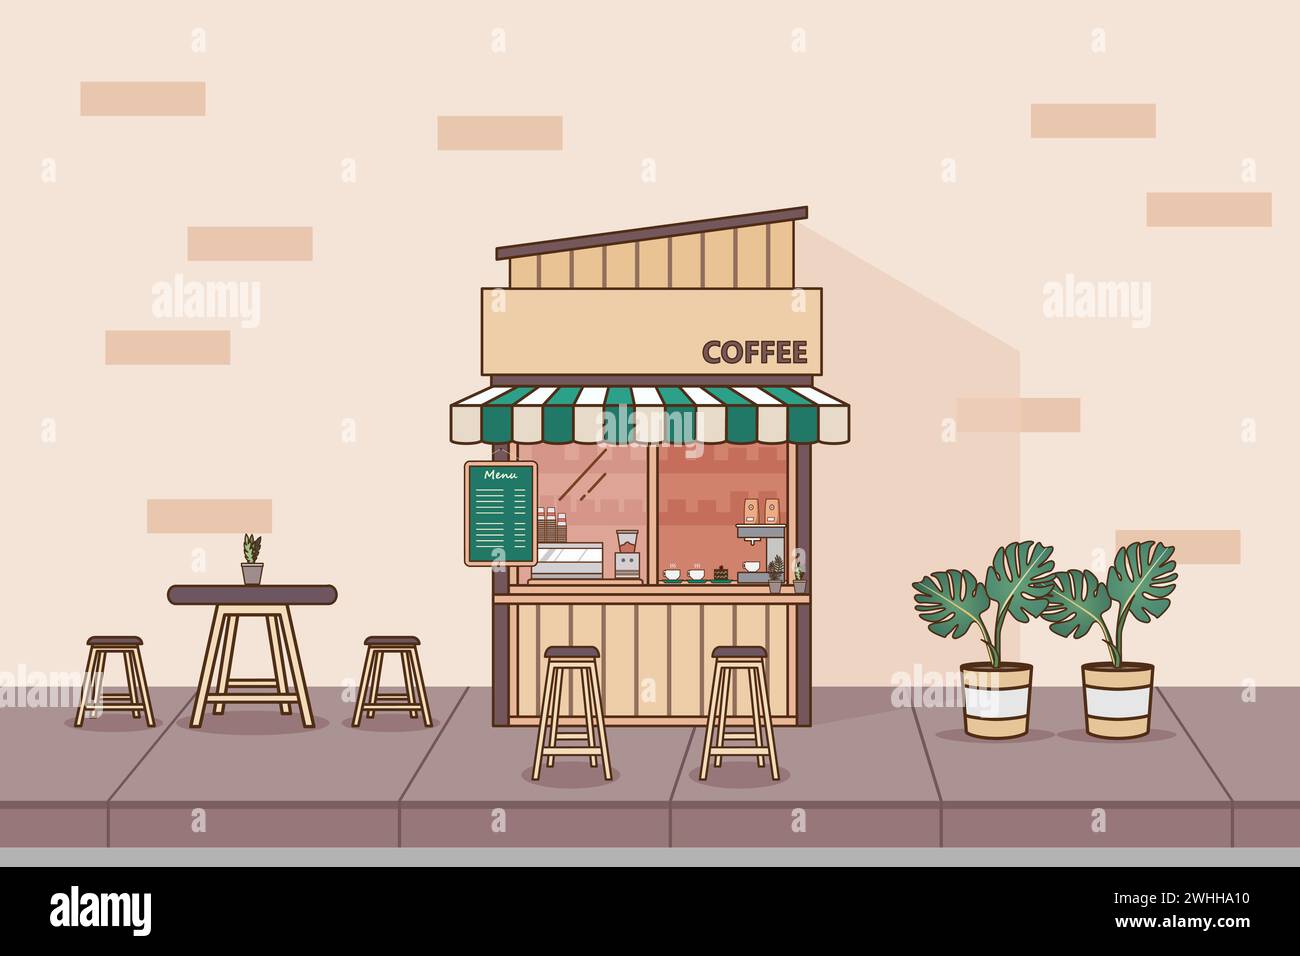 Coffee street stall vector illustration. Outdoor cafe on the pedestrian area. Stock Vector